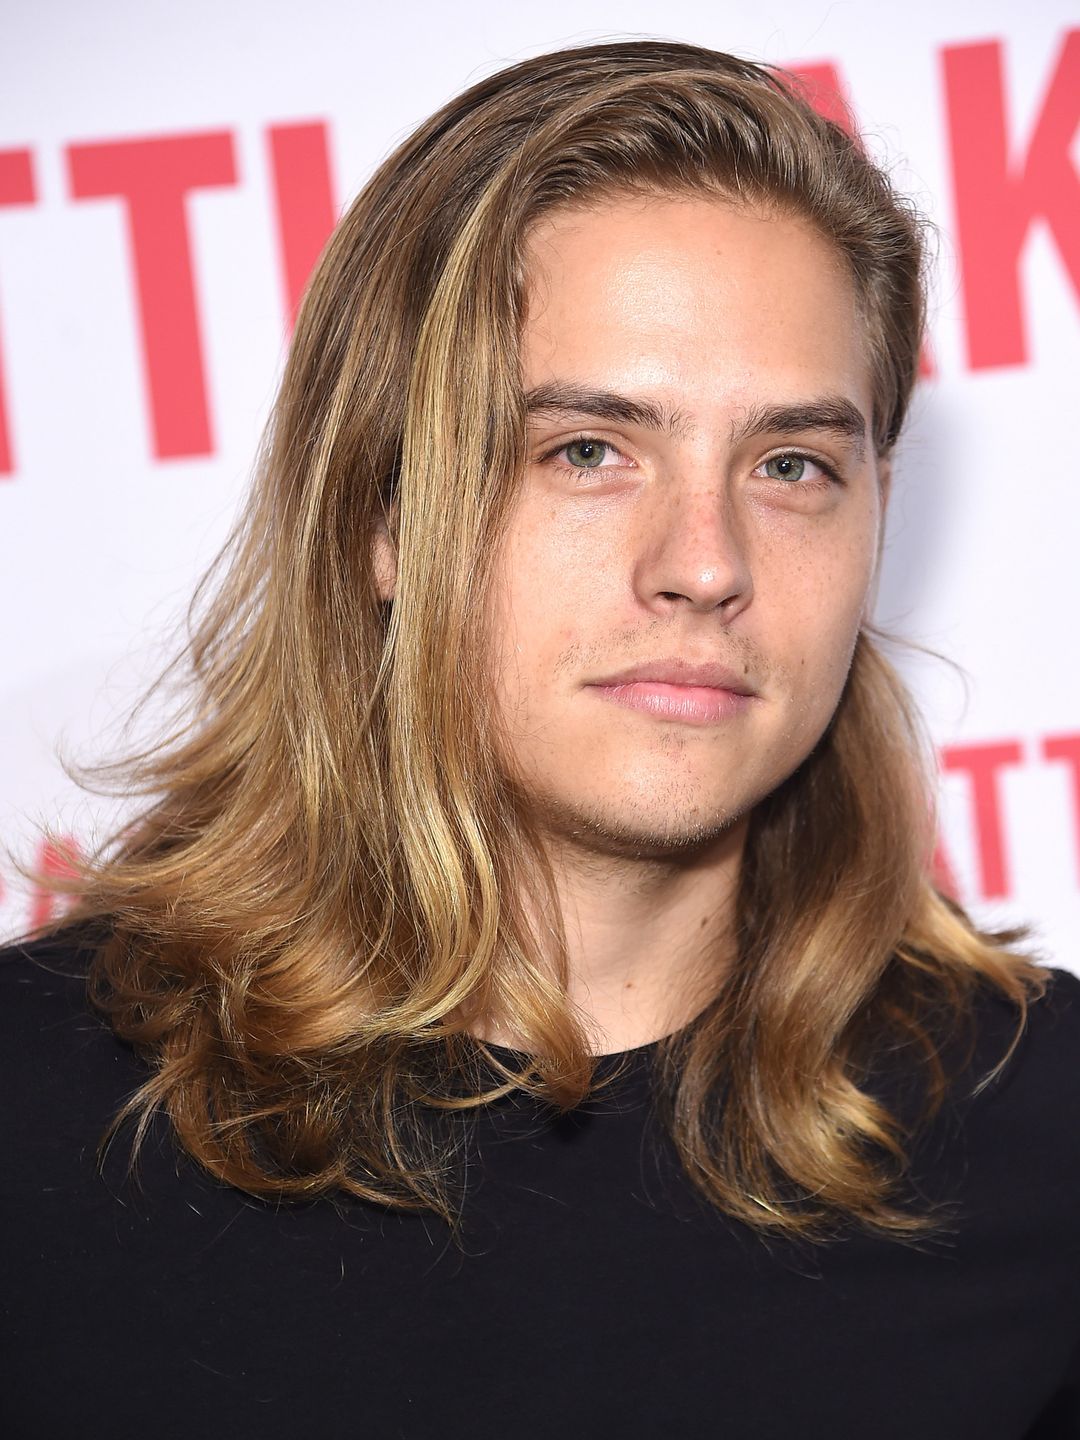 Dylan Sprouse early career